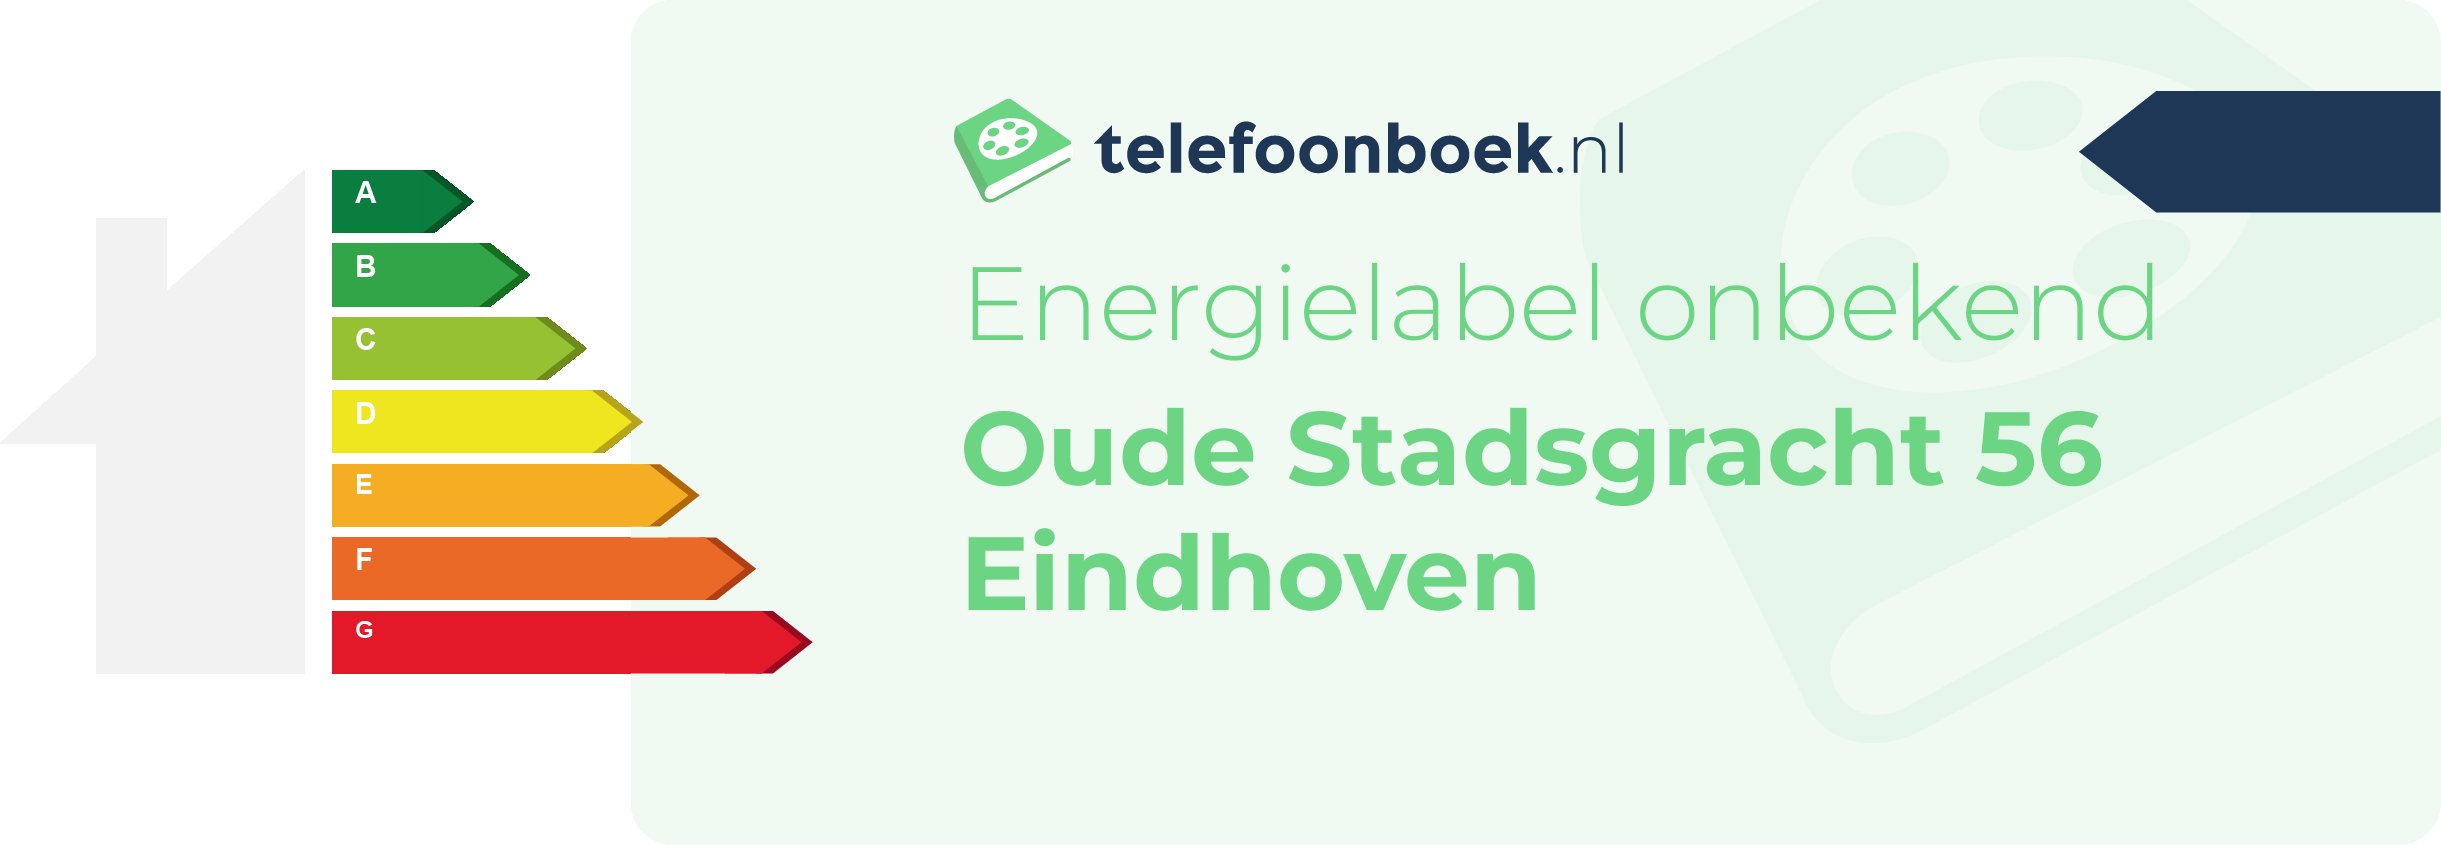 Energielabel Oude Stadsgracht 56 Eindhoven